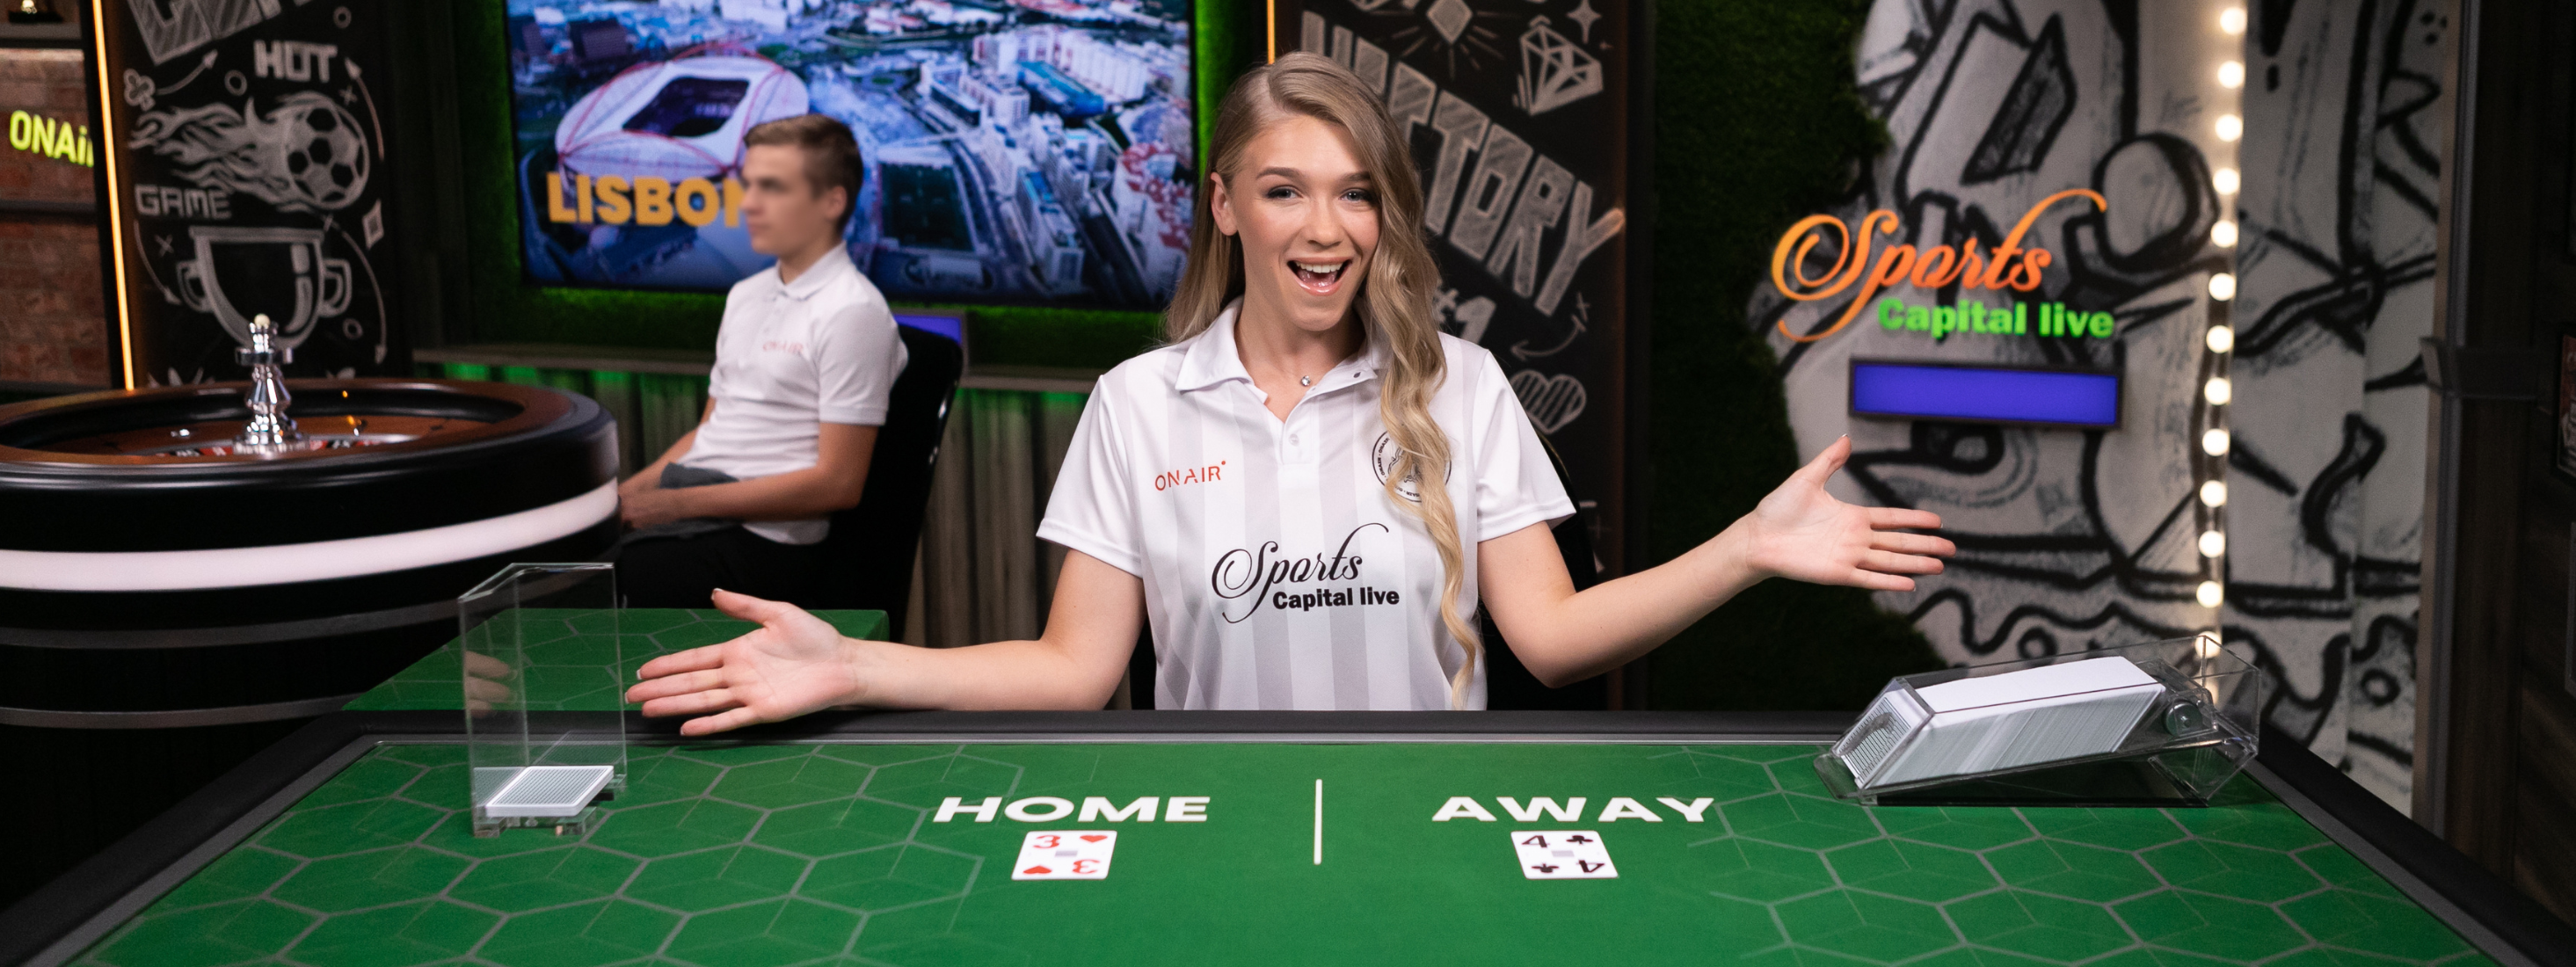 Female game presenter behind a table in Card Matchup, with 'Home' and 'Away' cards set out on the green felt table.